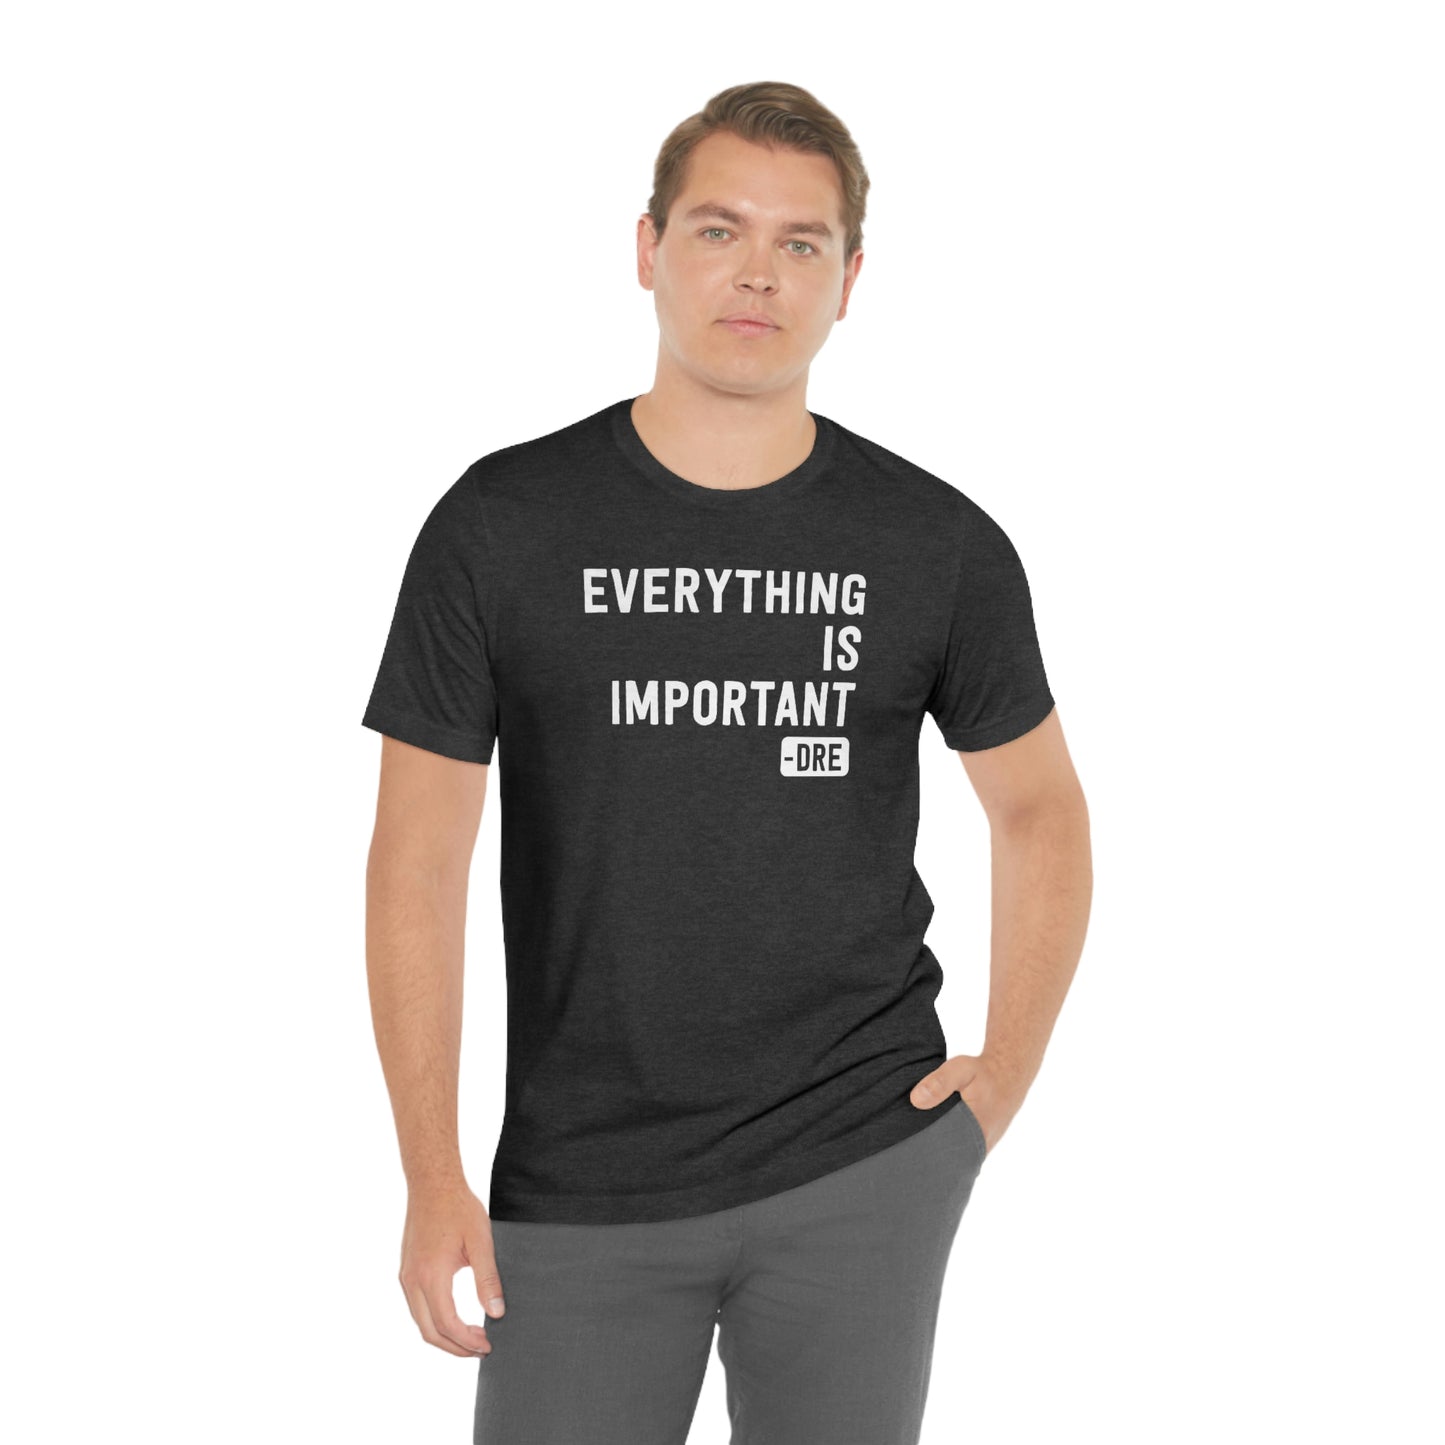 Everything Is Important (Dr. Dre) T-Shirt in Heather Dark Grey - Male Model